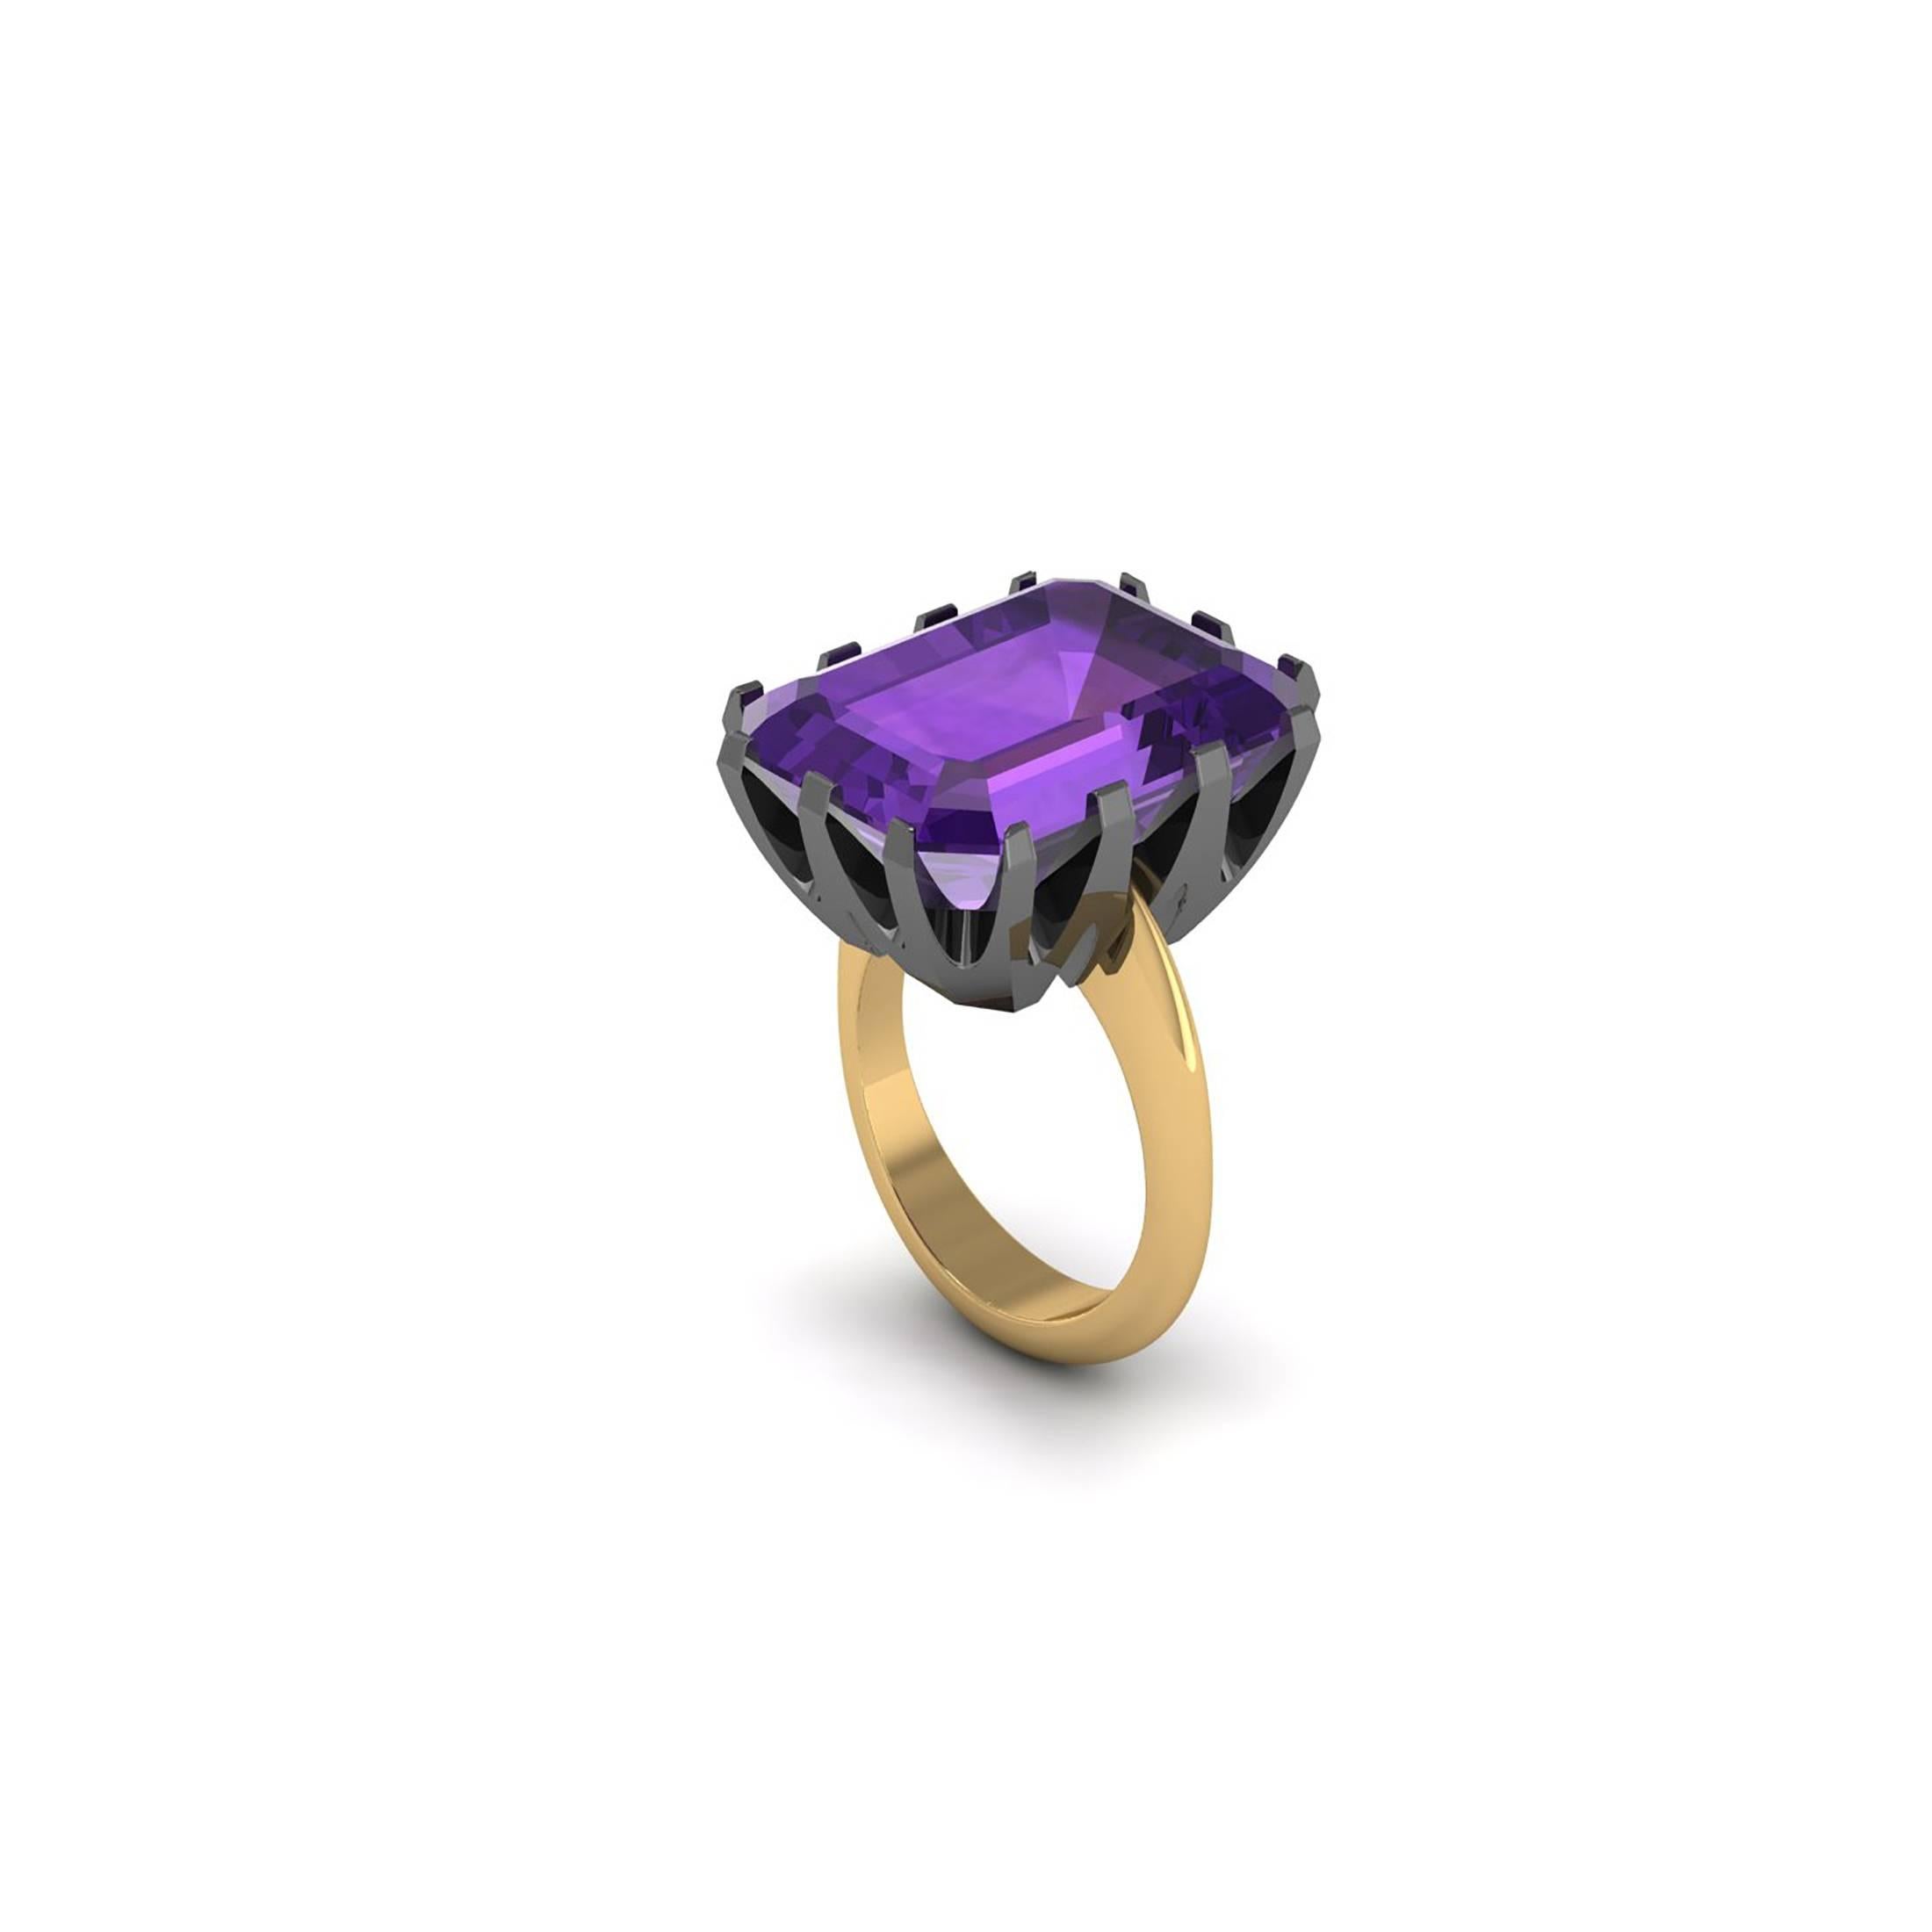 From Ferrucci a stunning natural Purple Amethyst, deep intense purple, emerald cut, totalling approximately 23carats,
accompanied by a hand made 18k black and 18k yellow gold, two tone ring, for a statement pieces.
A blend of modern design and